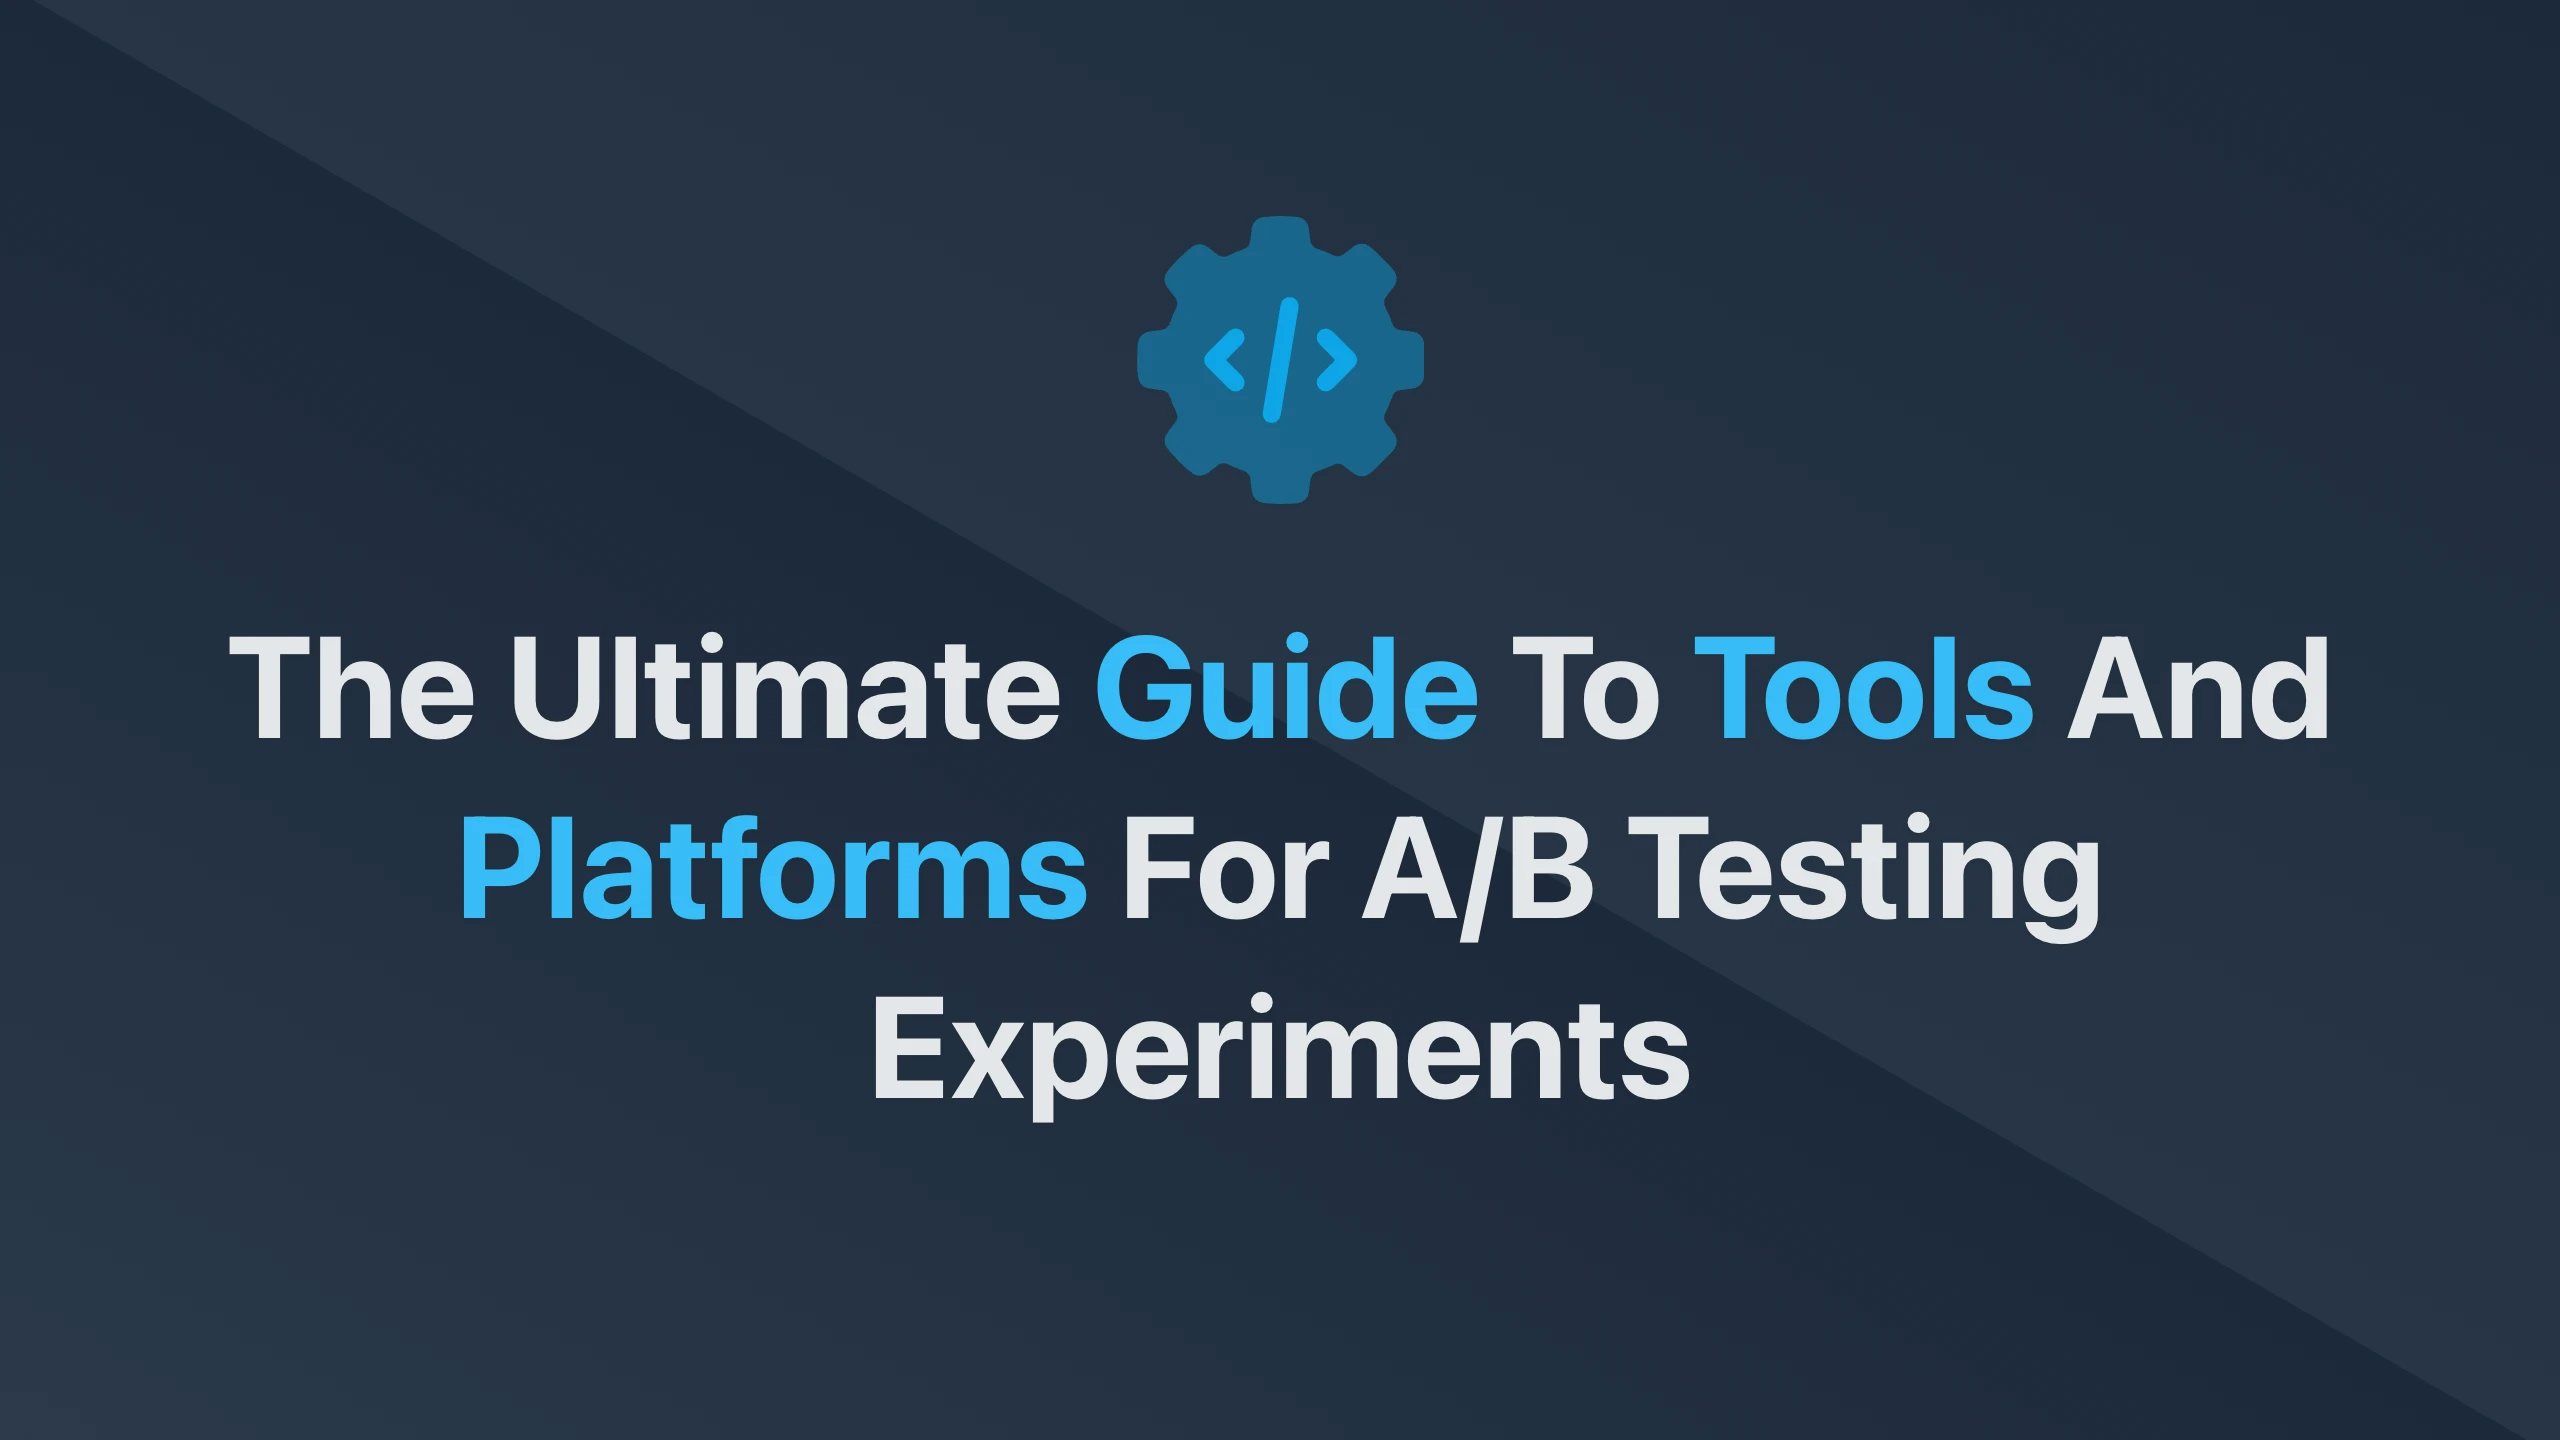 Cover Image for The Ultimate Guide to Tools and Platforms for A/B Testing Experiments